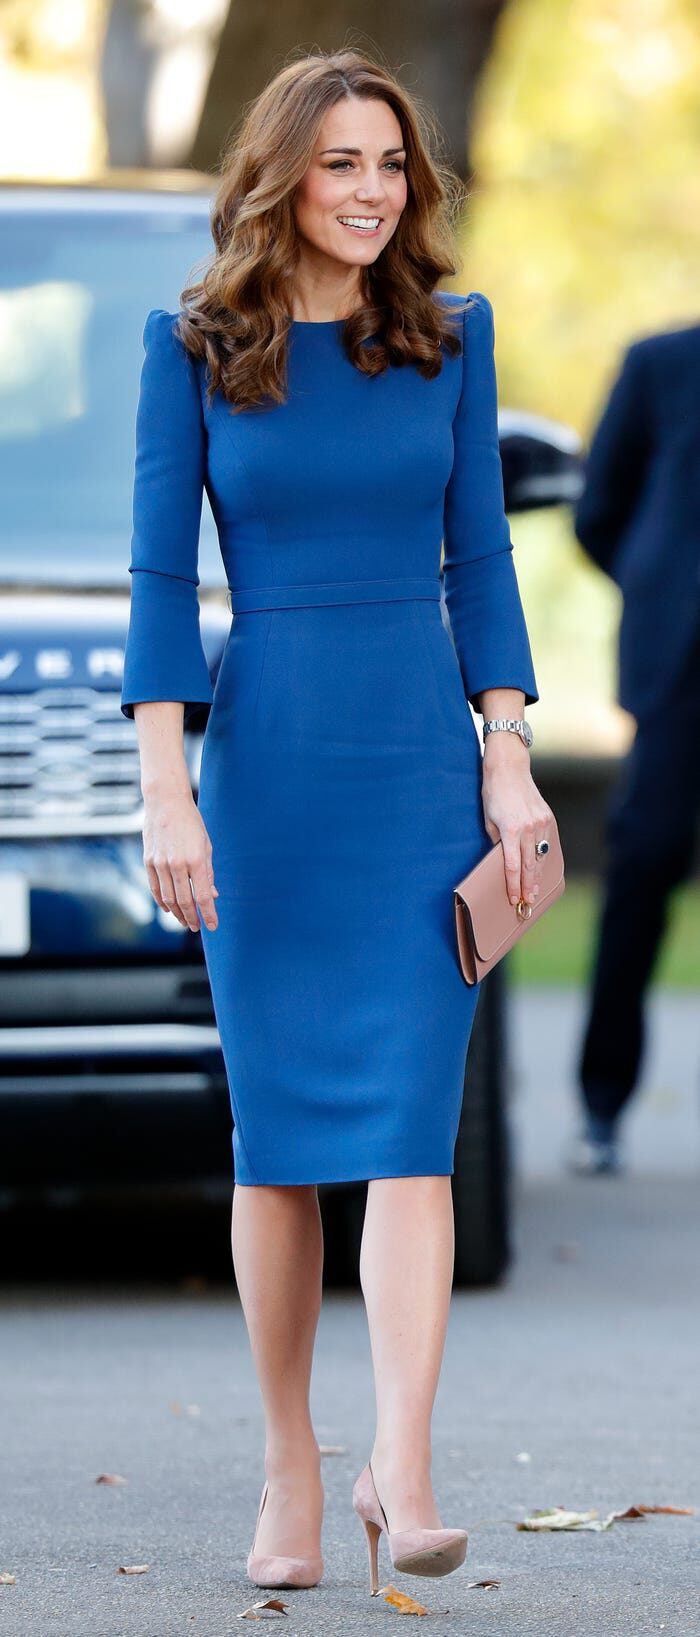 What happened to Princess Kate: Brilliant beauty, but her body is thin and skinny - 1